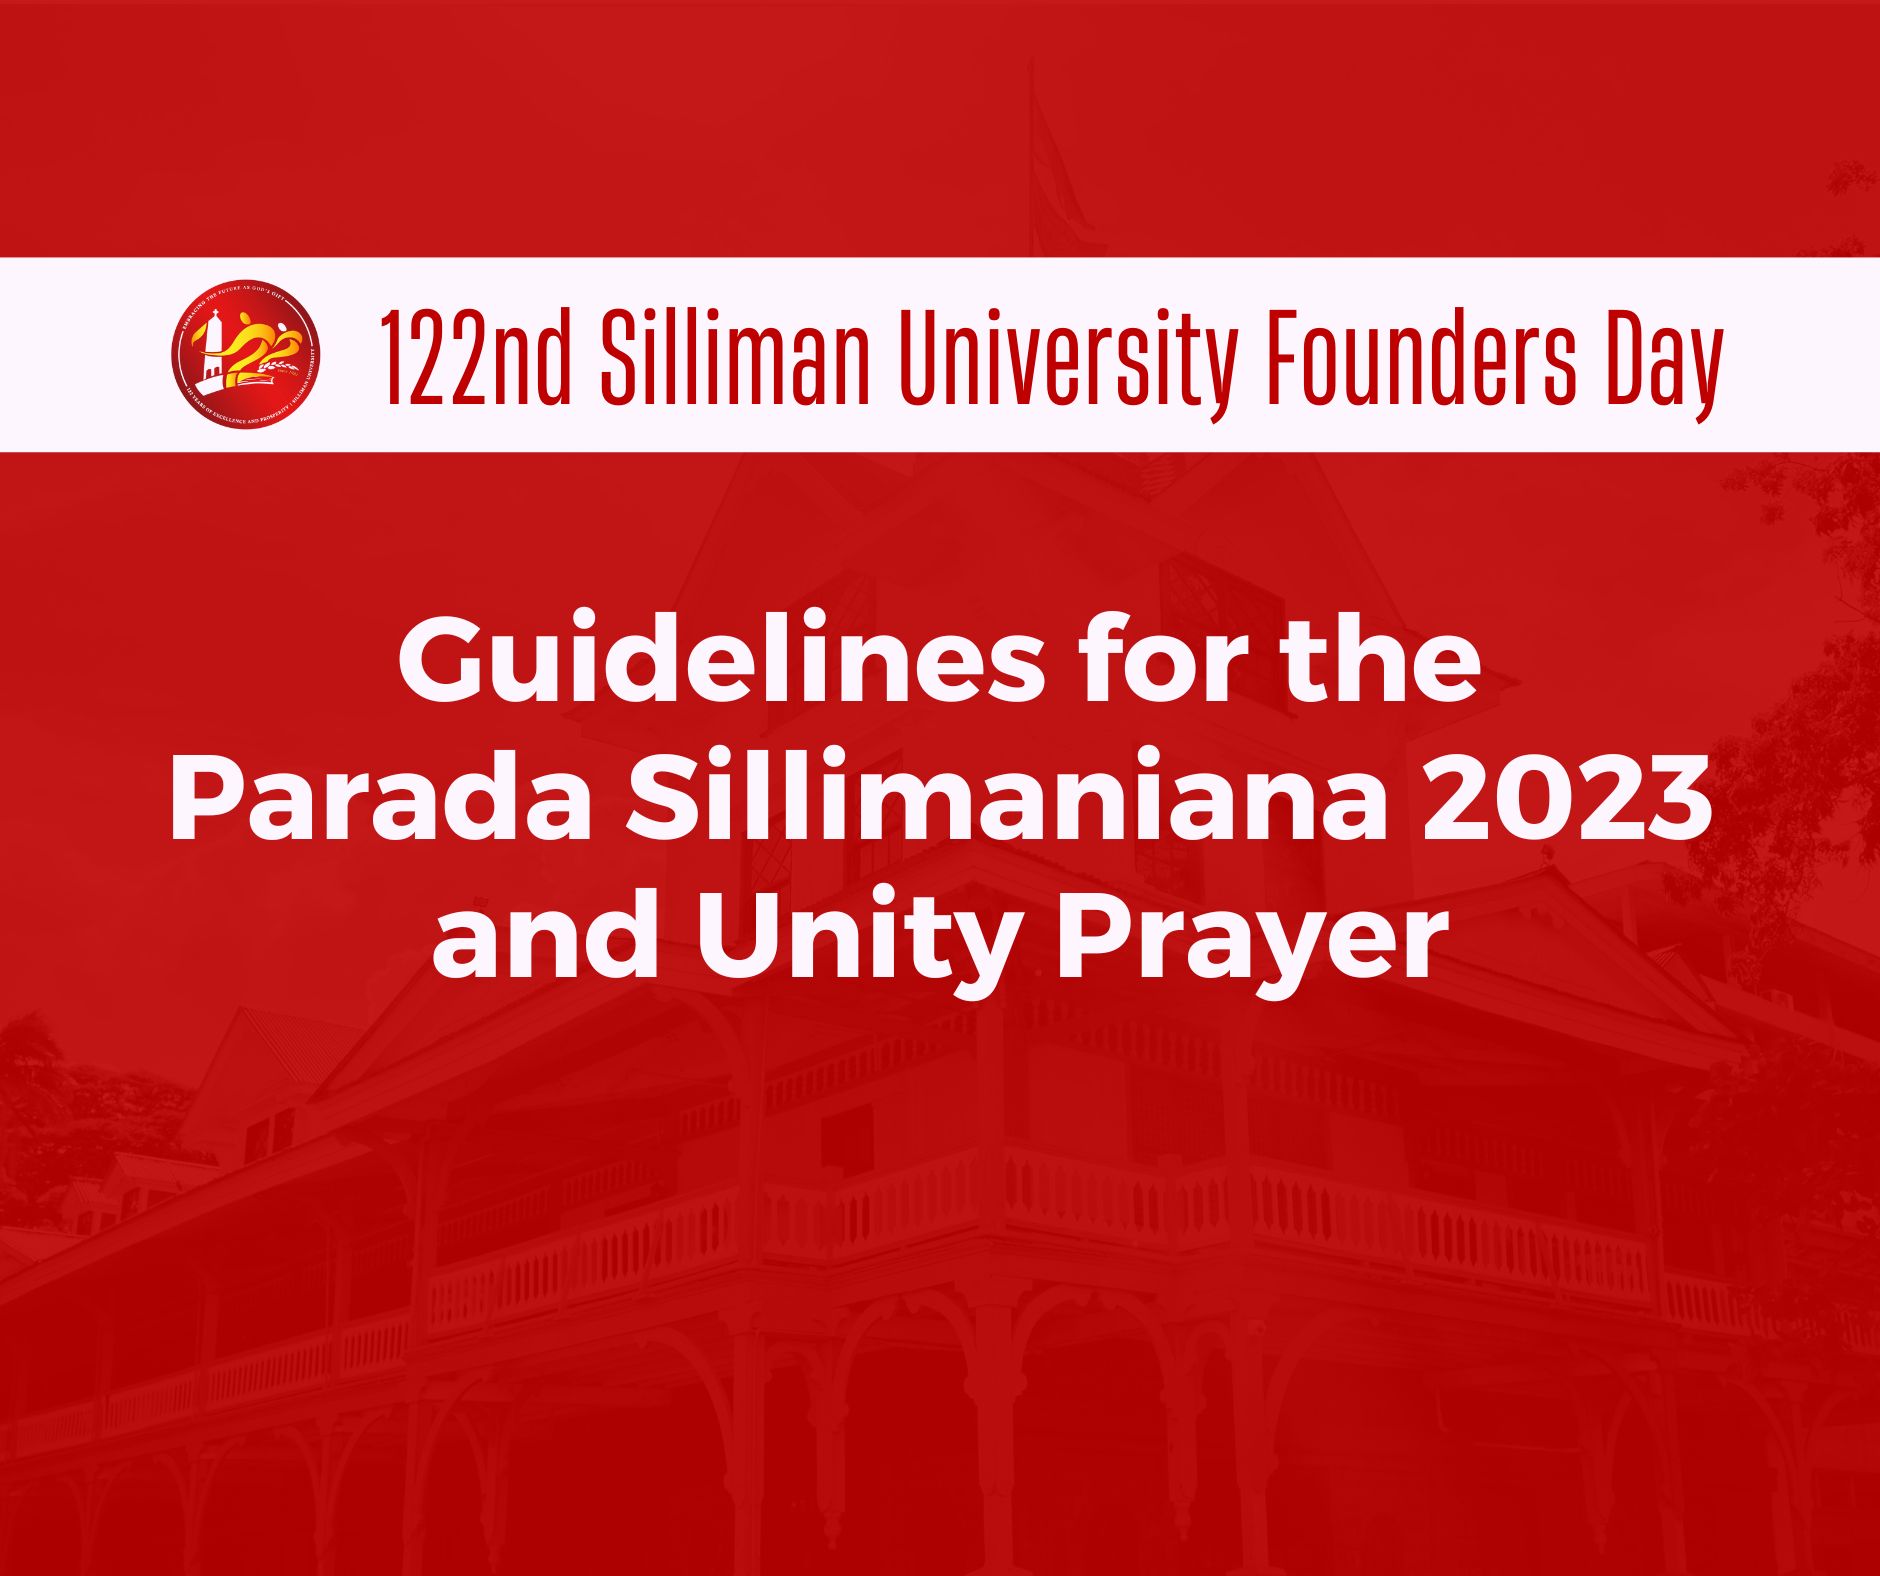 Guidelines for the Parada Sillimaniana 2023 and Unity Prayer